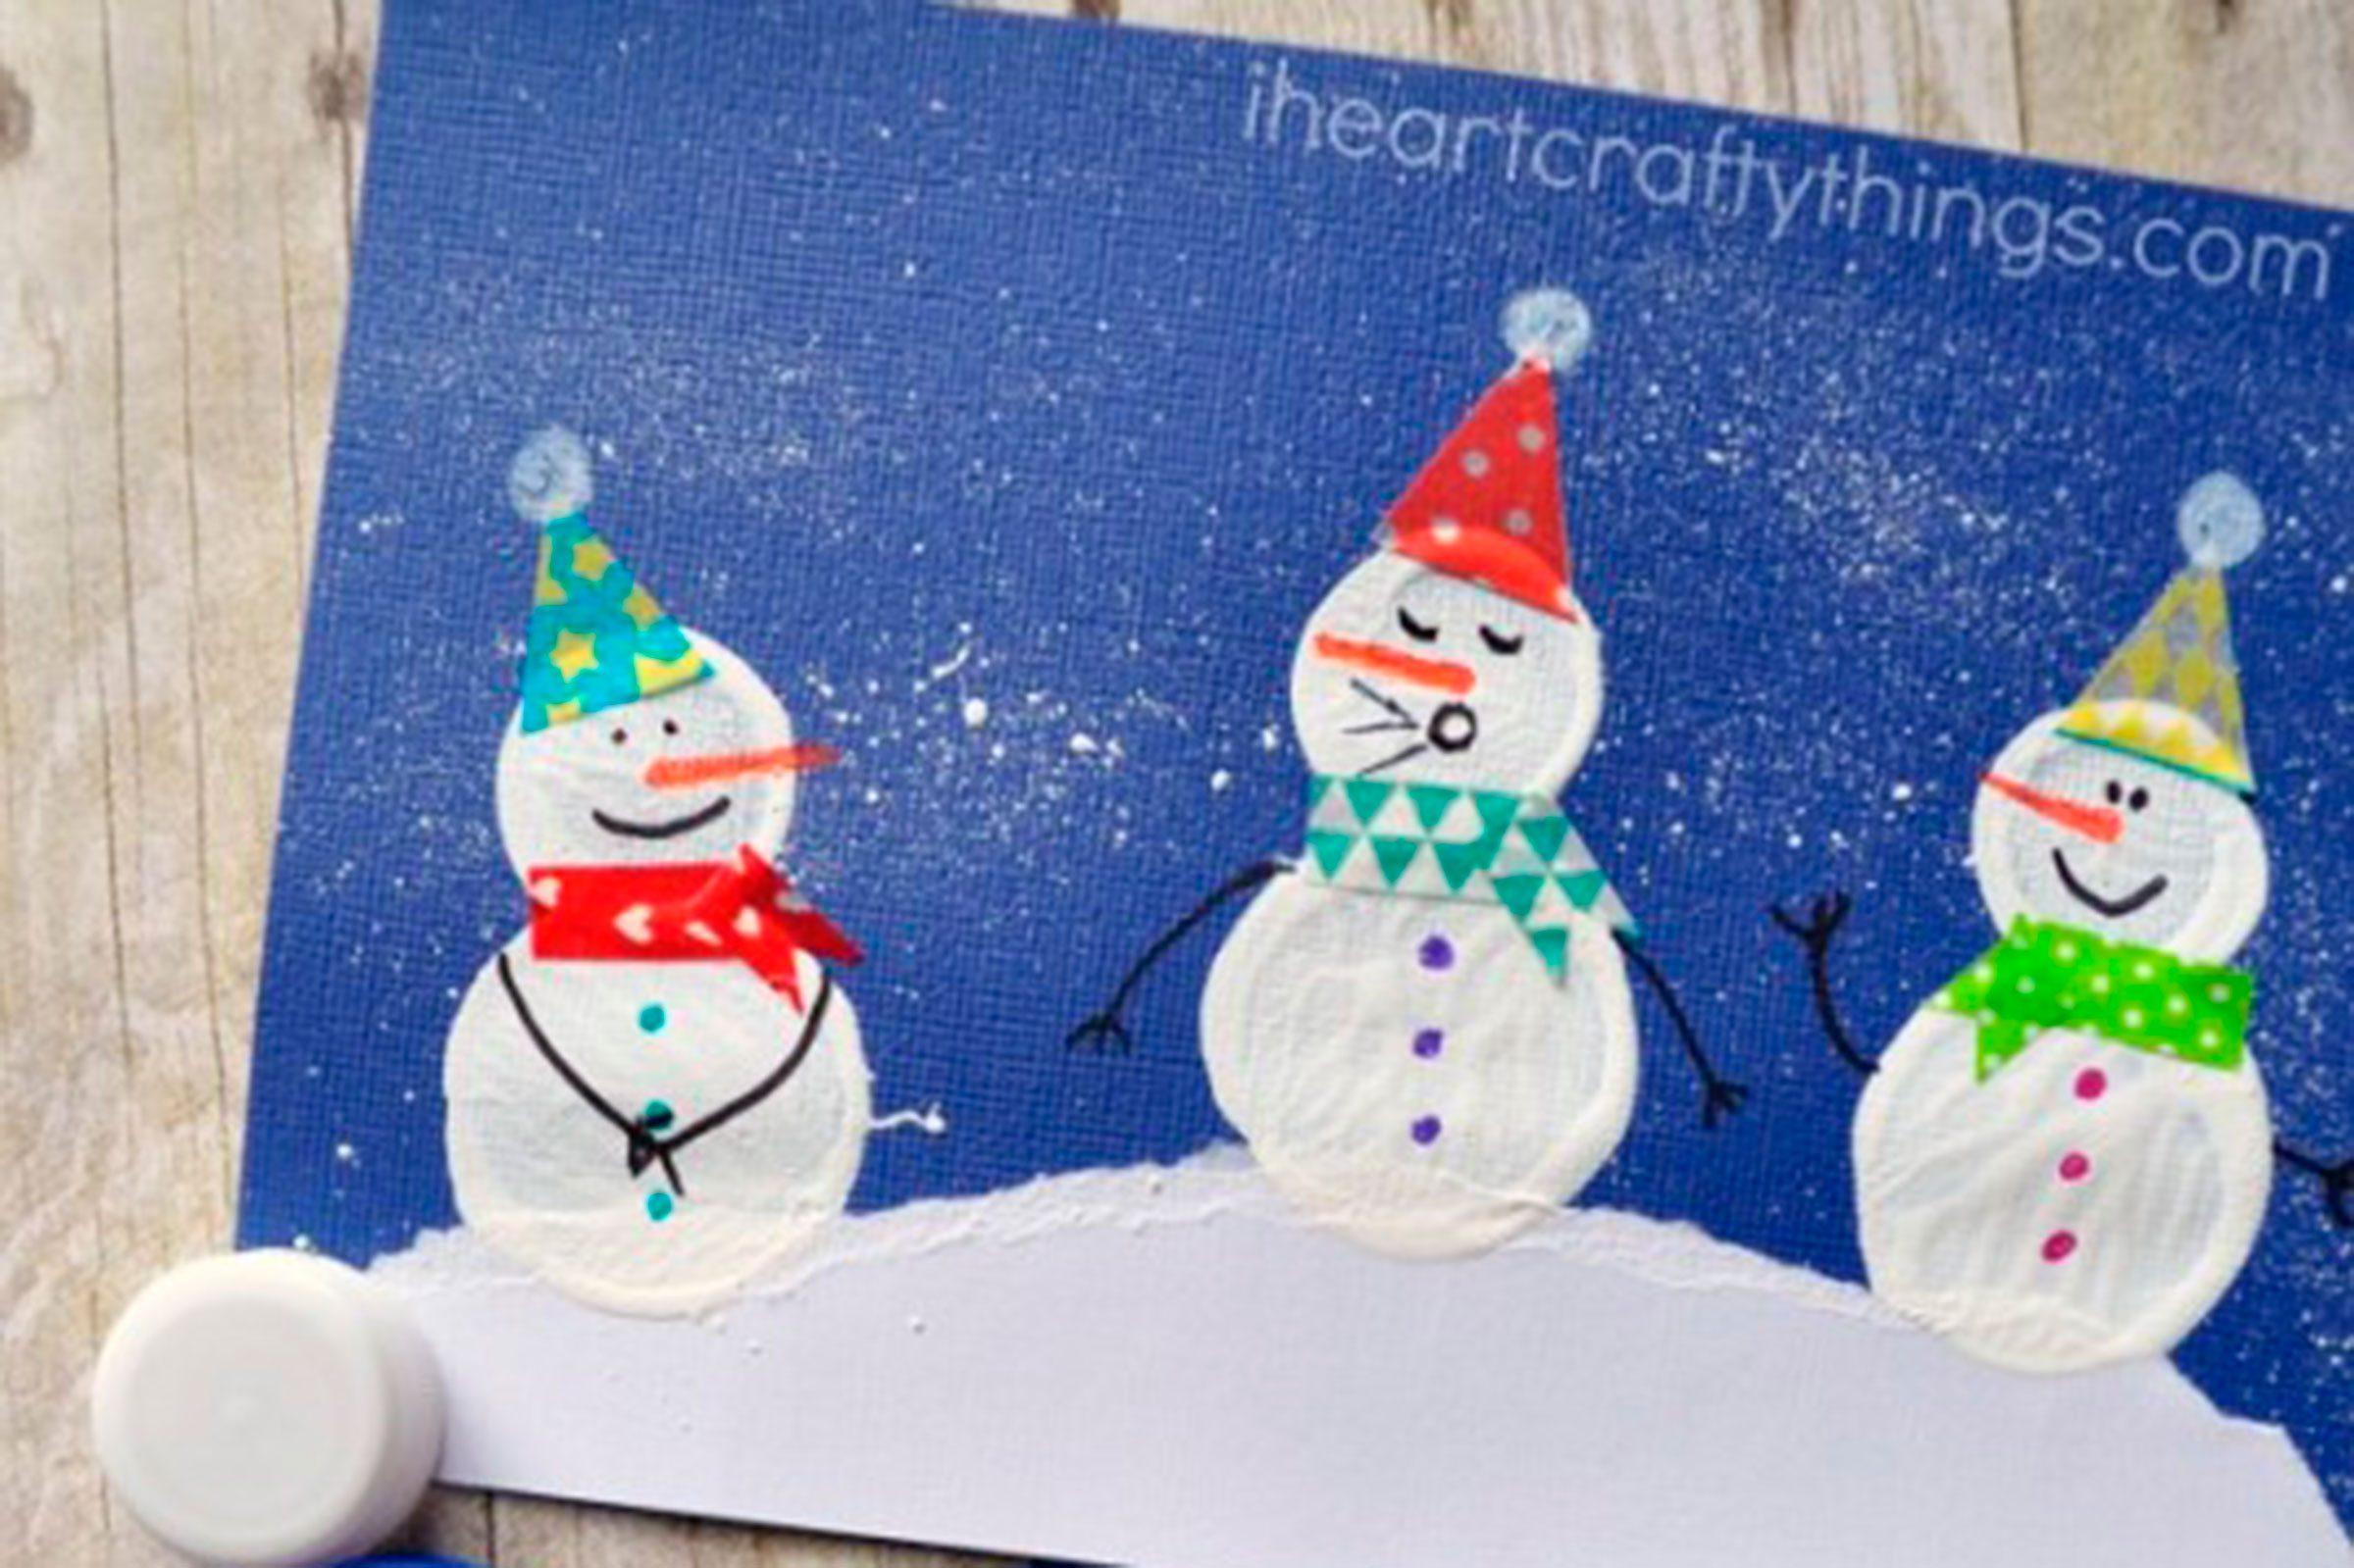 Snowman Craft For Preschoolers To Make Archives Image Easy Crafts For